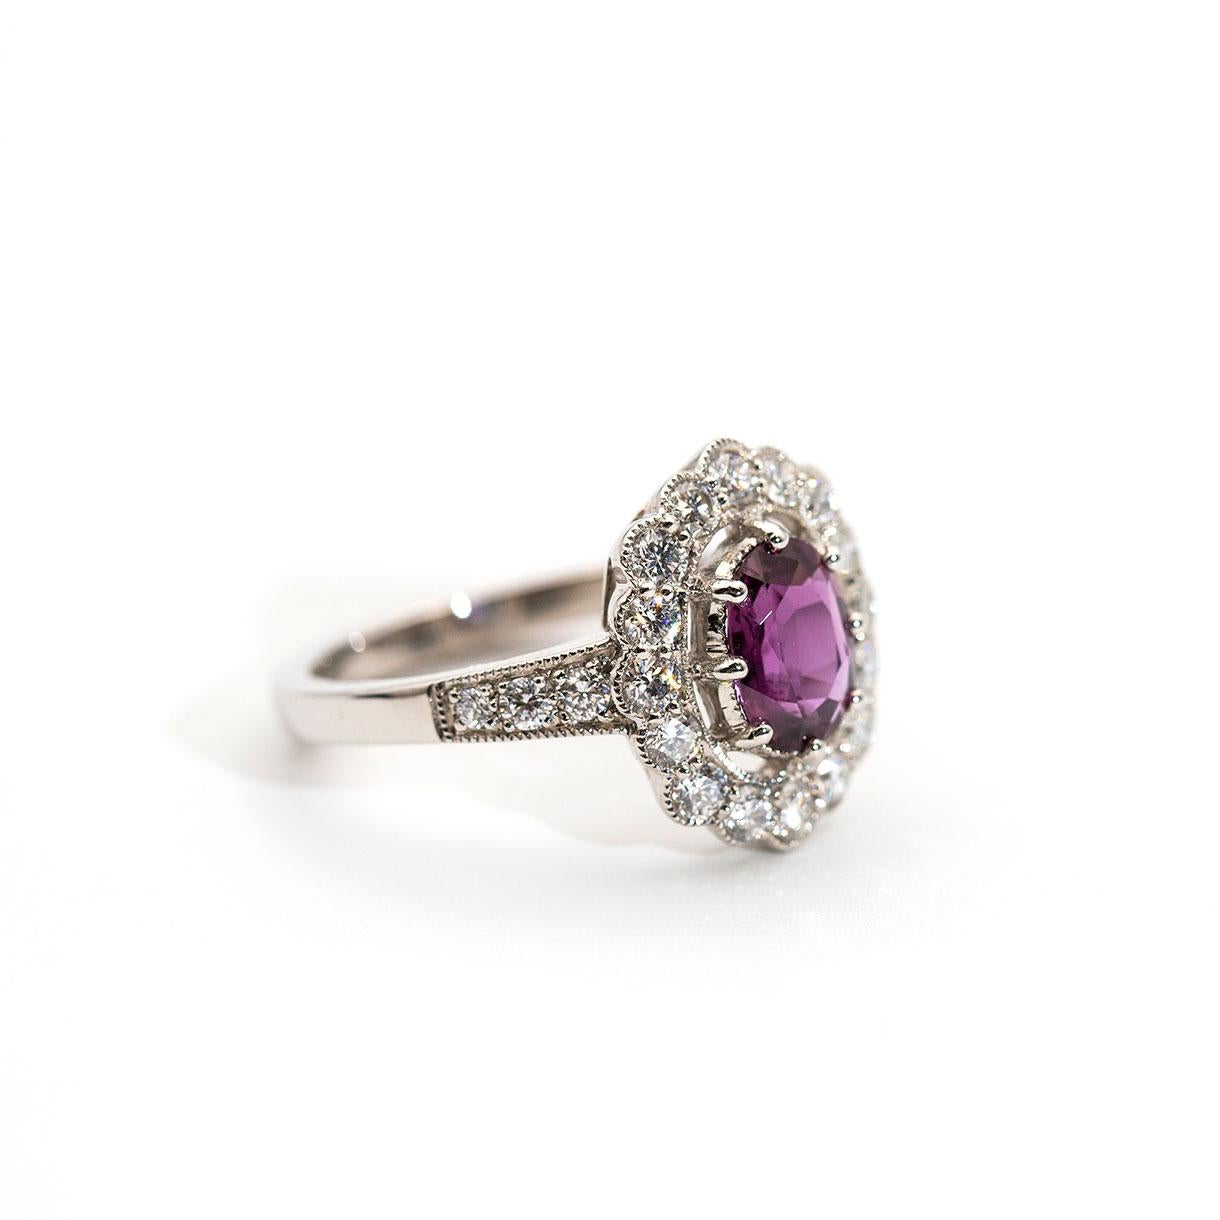 Forged in platinum, this delightful vintage-inspired ring boasts an alluring 1.10 carat bright purple-red faceted natural ruby held in an attractive eight claw setting and surrounded by a striking halo of sixteen shimmering round brilliant cut